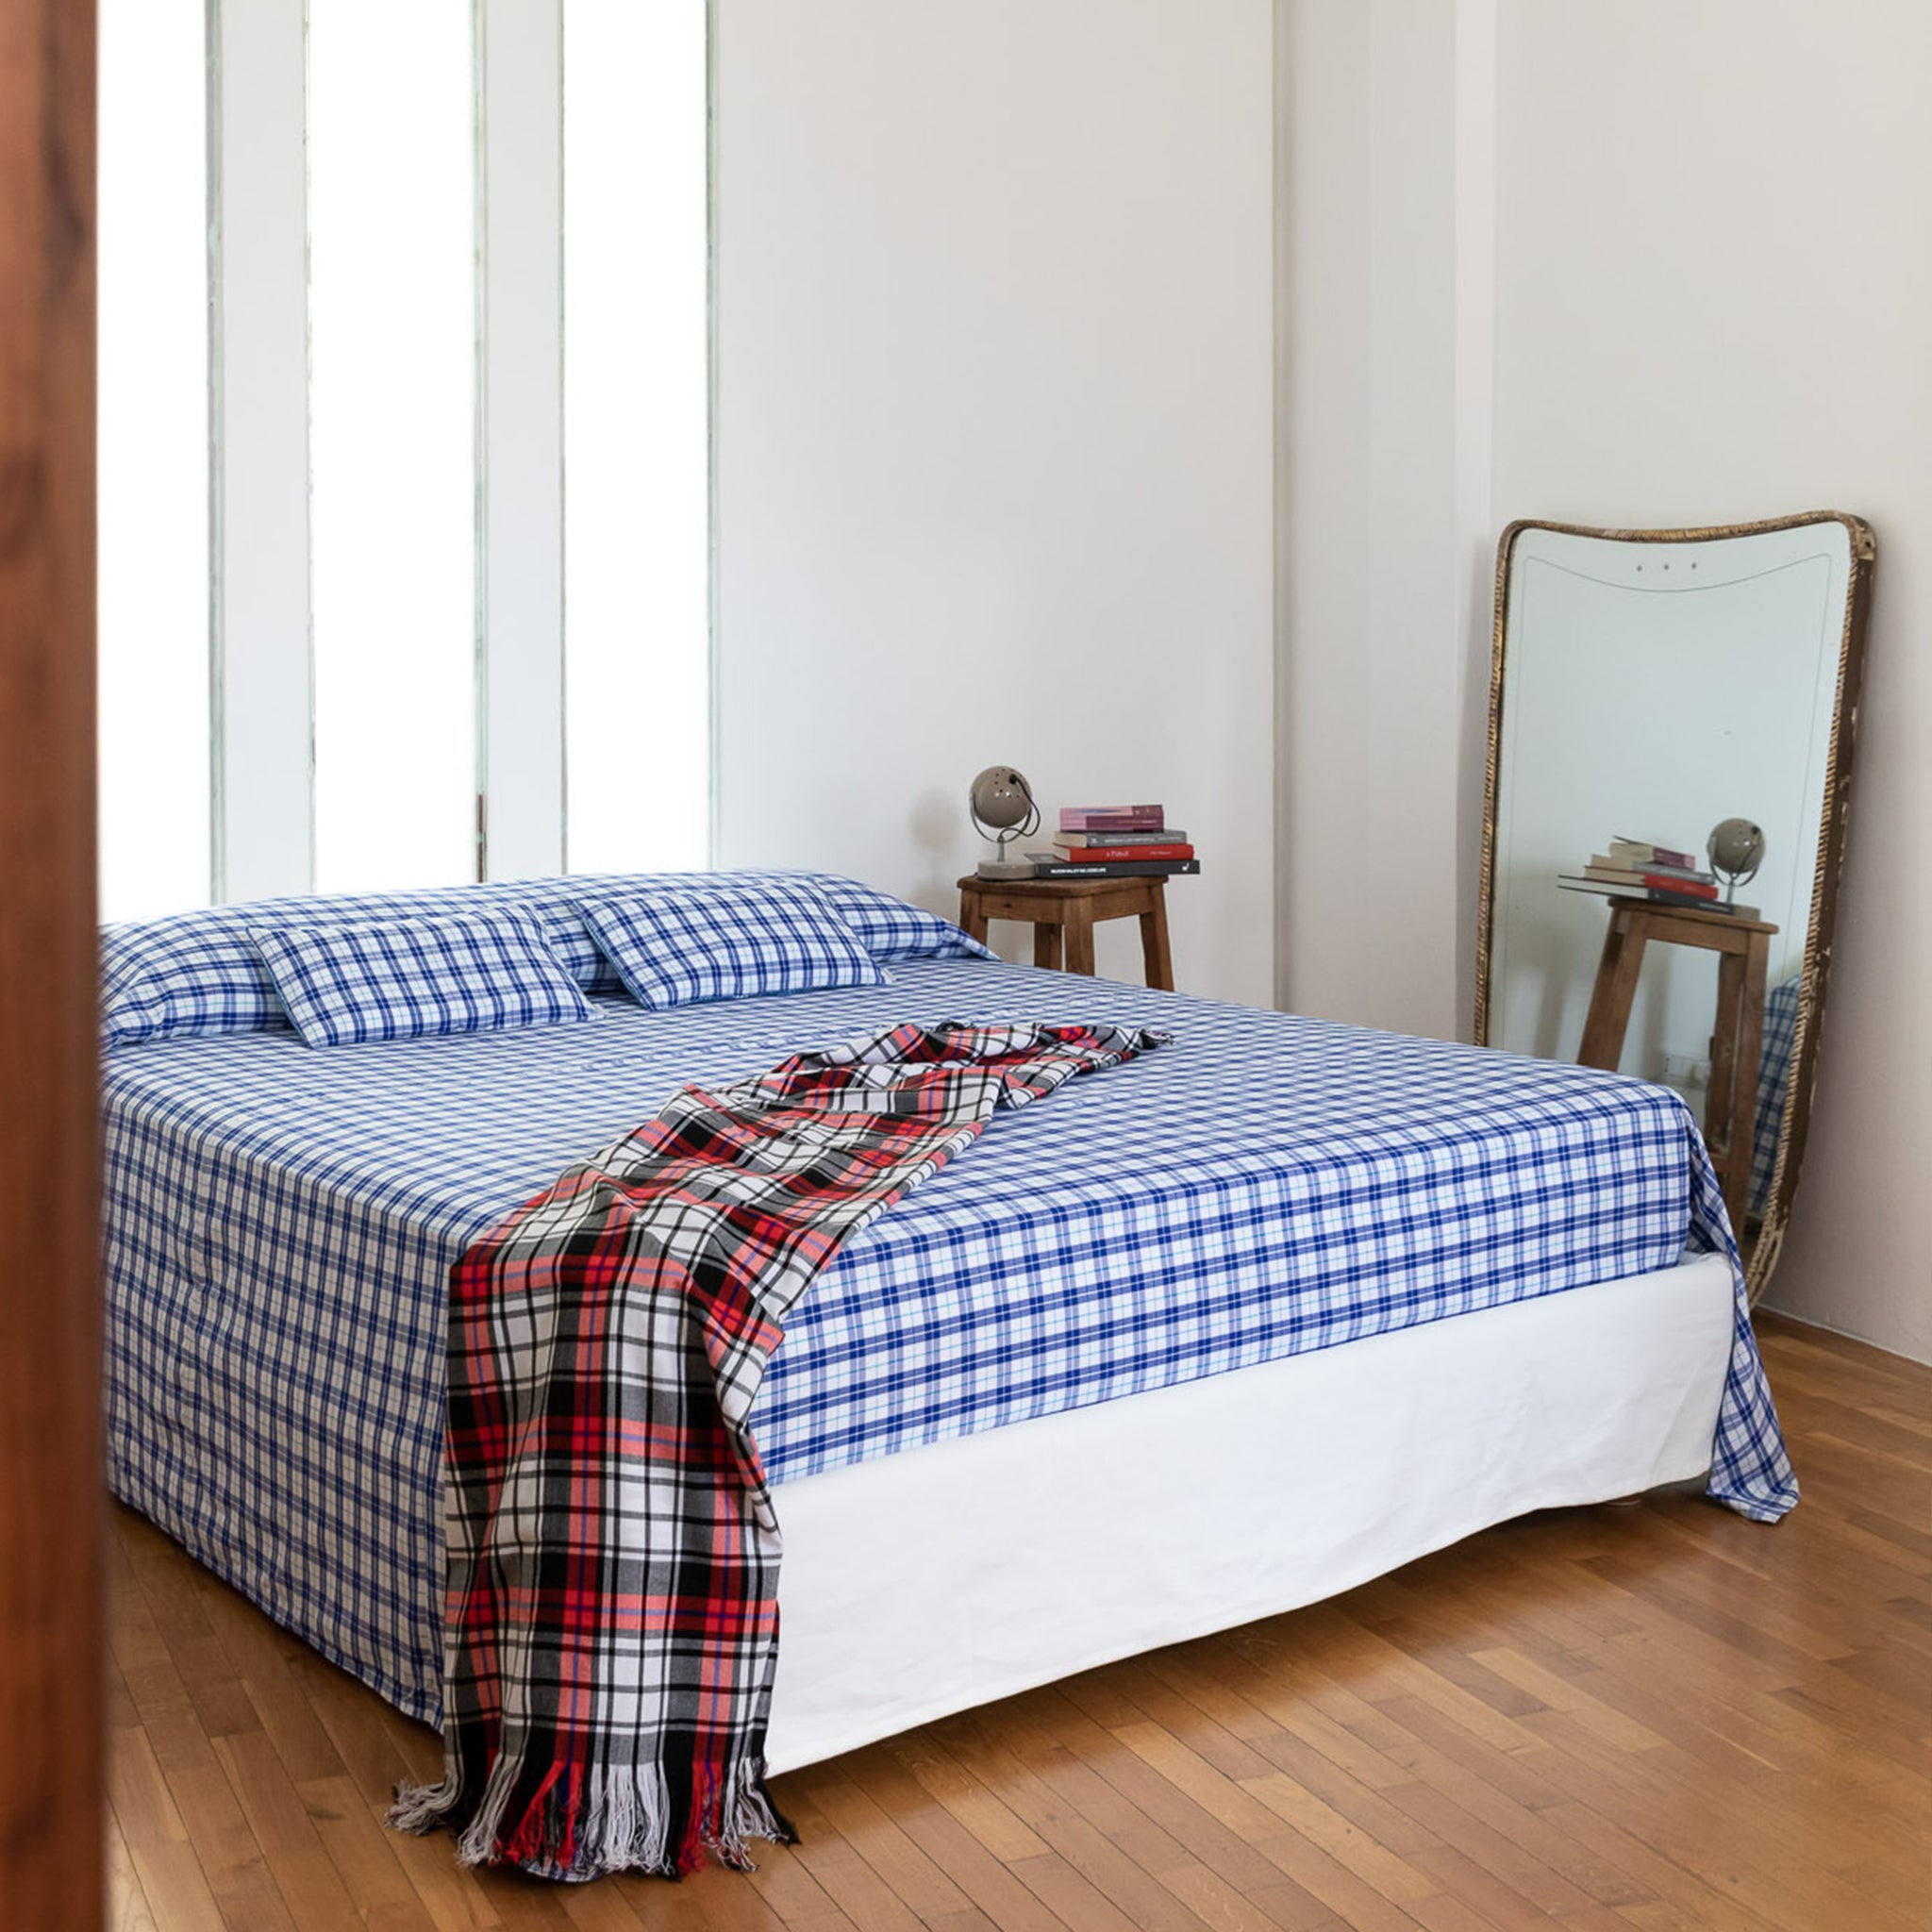 Double bed with Maasai checkered bedspread in blue&white and matching plaid